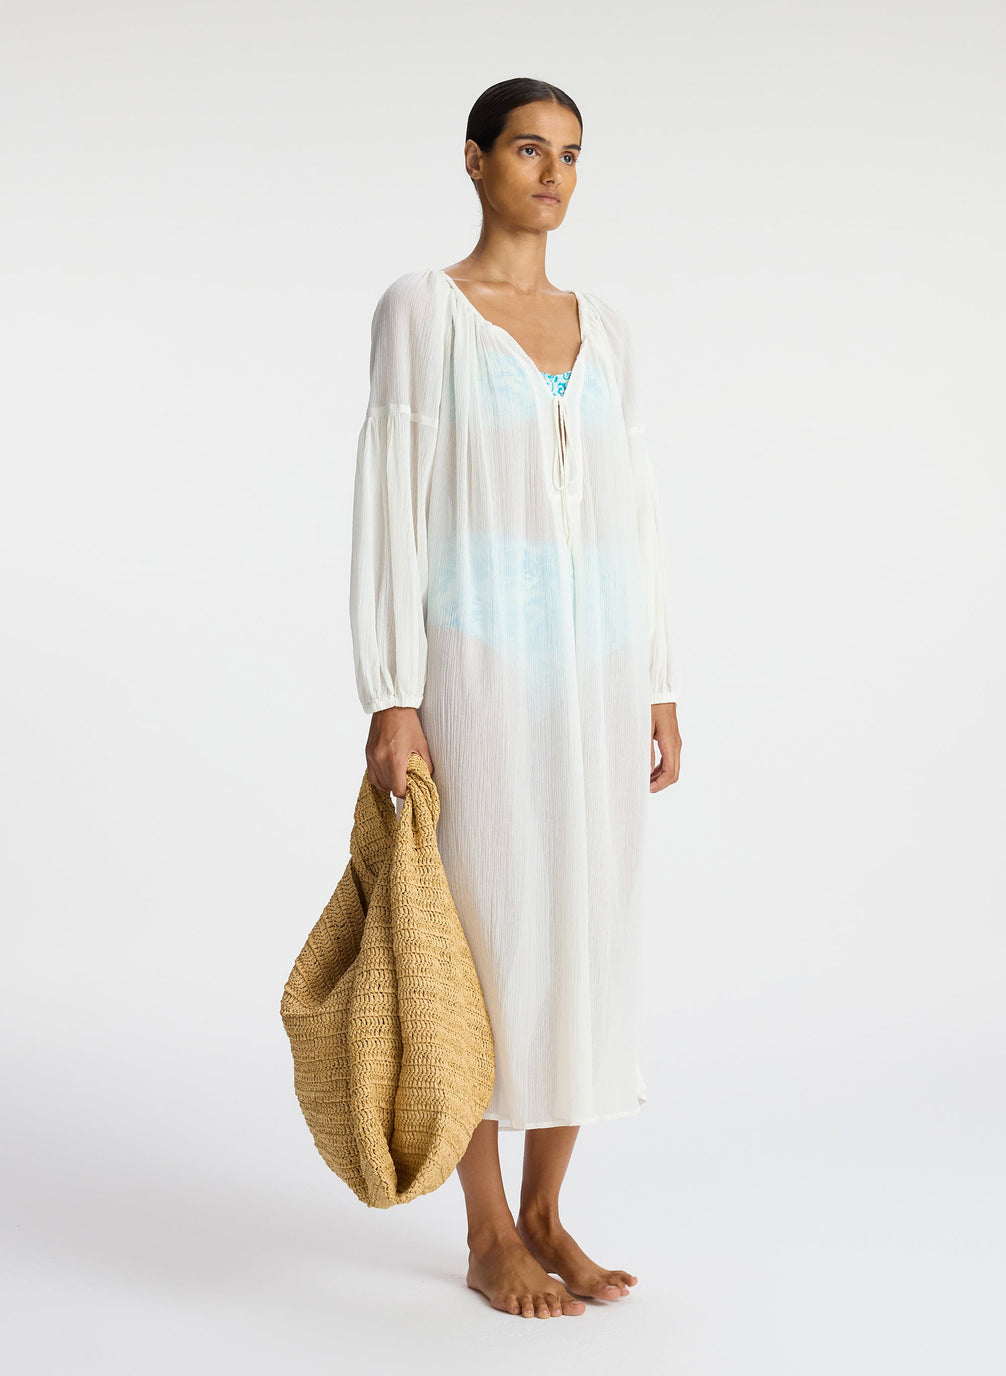 side view of woman wearing white sheer swim cover up dress